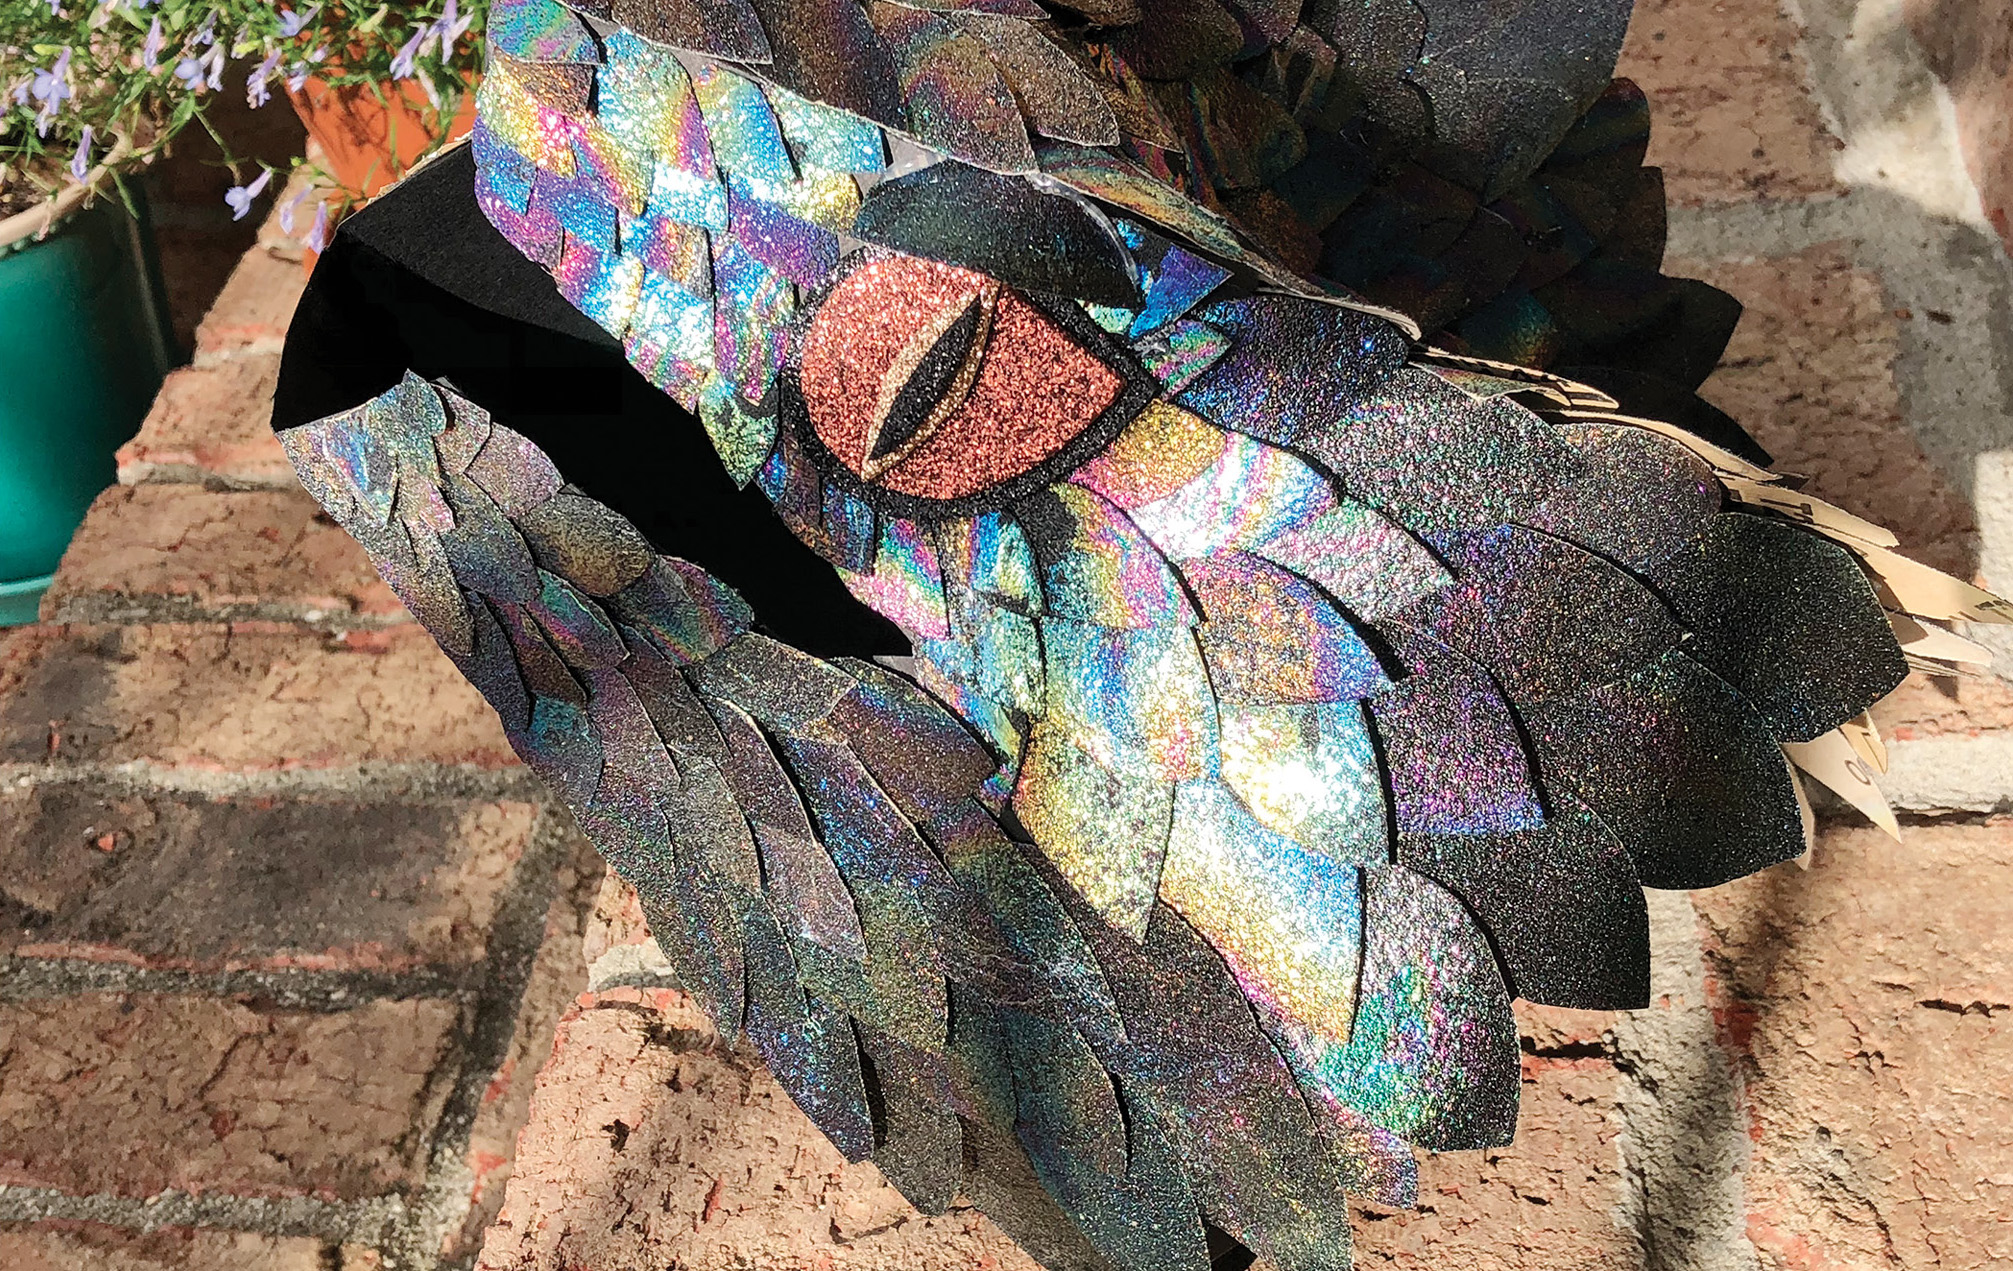 An example of an advanced art project using iridescent scales created with sandpaper and clear nail polish thin films. The eye of this dragon was made with glitter foam paper, and the frame was simply an origami dragon head shaped using black matting paper.